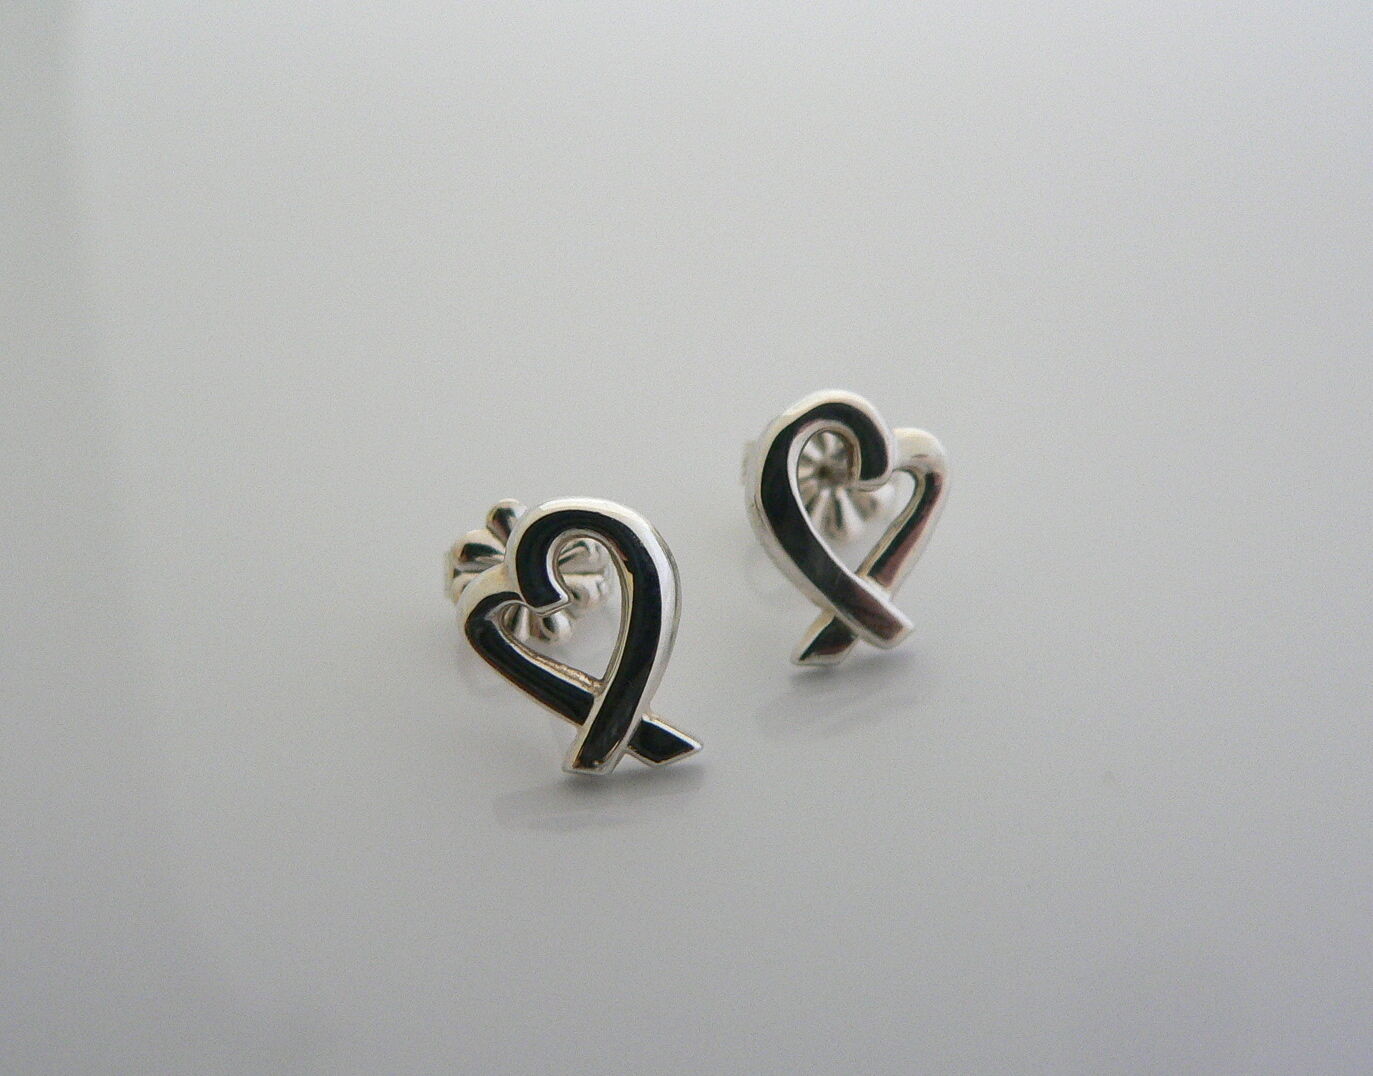 Tiffany & Co Silver Picasso Mini Loving Heart Earrings Studs Gift Love Statement